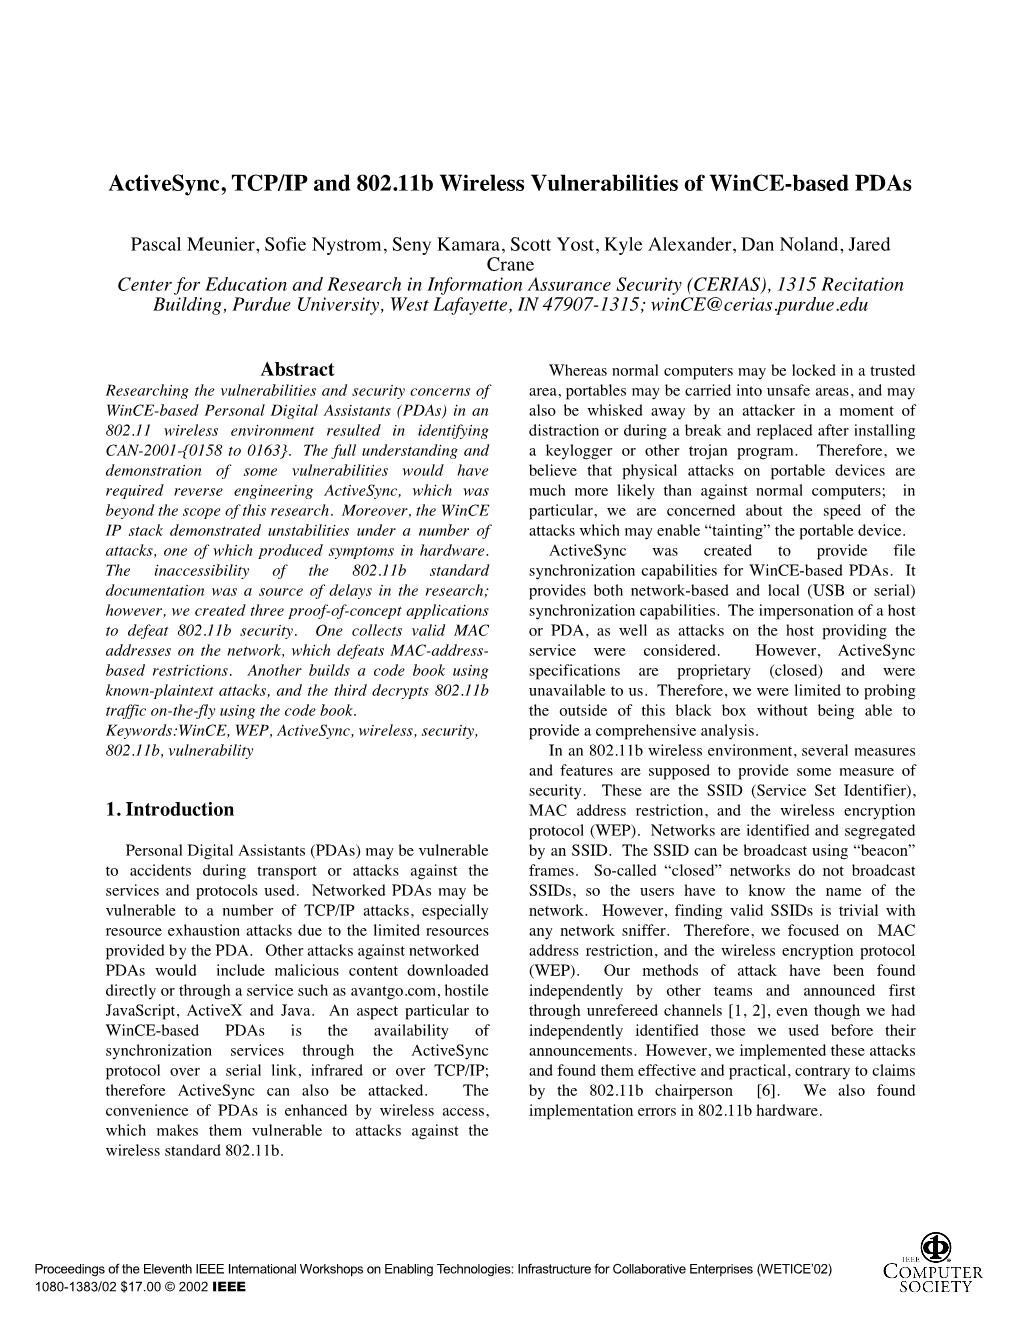 Activesync, TCP/IP and 802.11B Wireless Vulnerabilities of Wince-Based Pdas